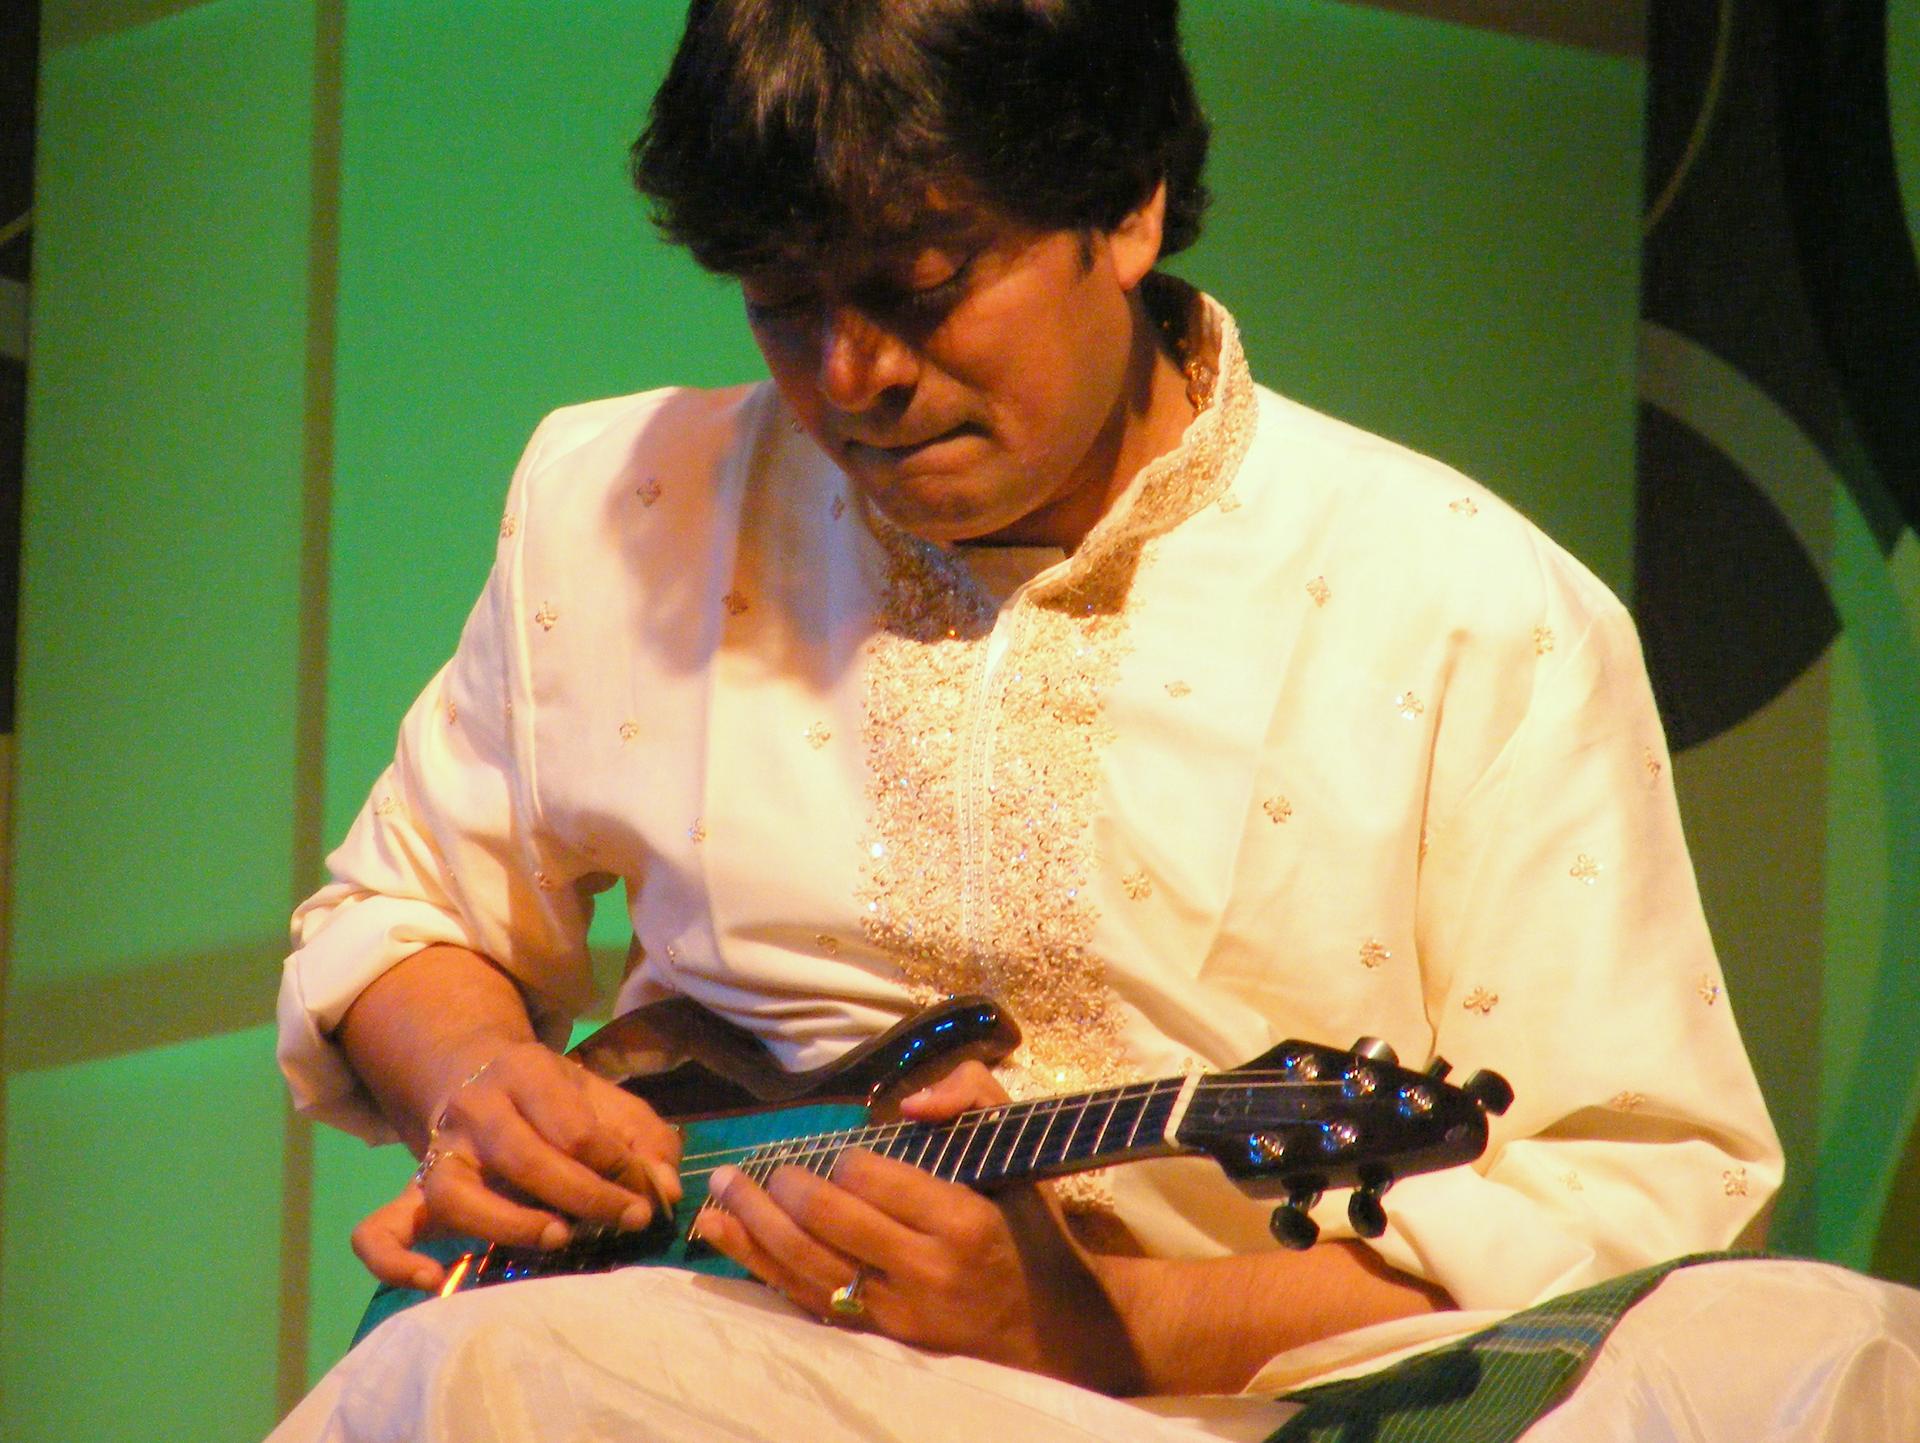 "Mandolin" Srinivas performs a live show in Pune, India, in 2009. The musician introduced his electric mandolin into India's ancient Carnatic music.